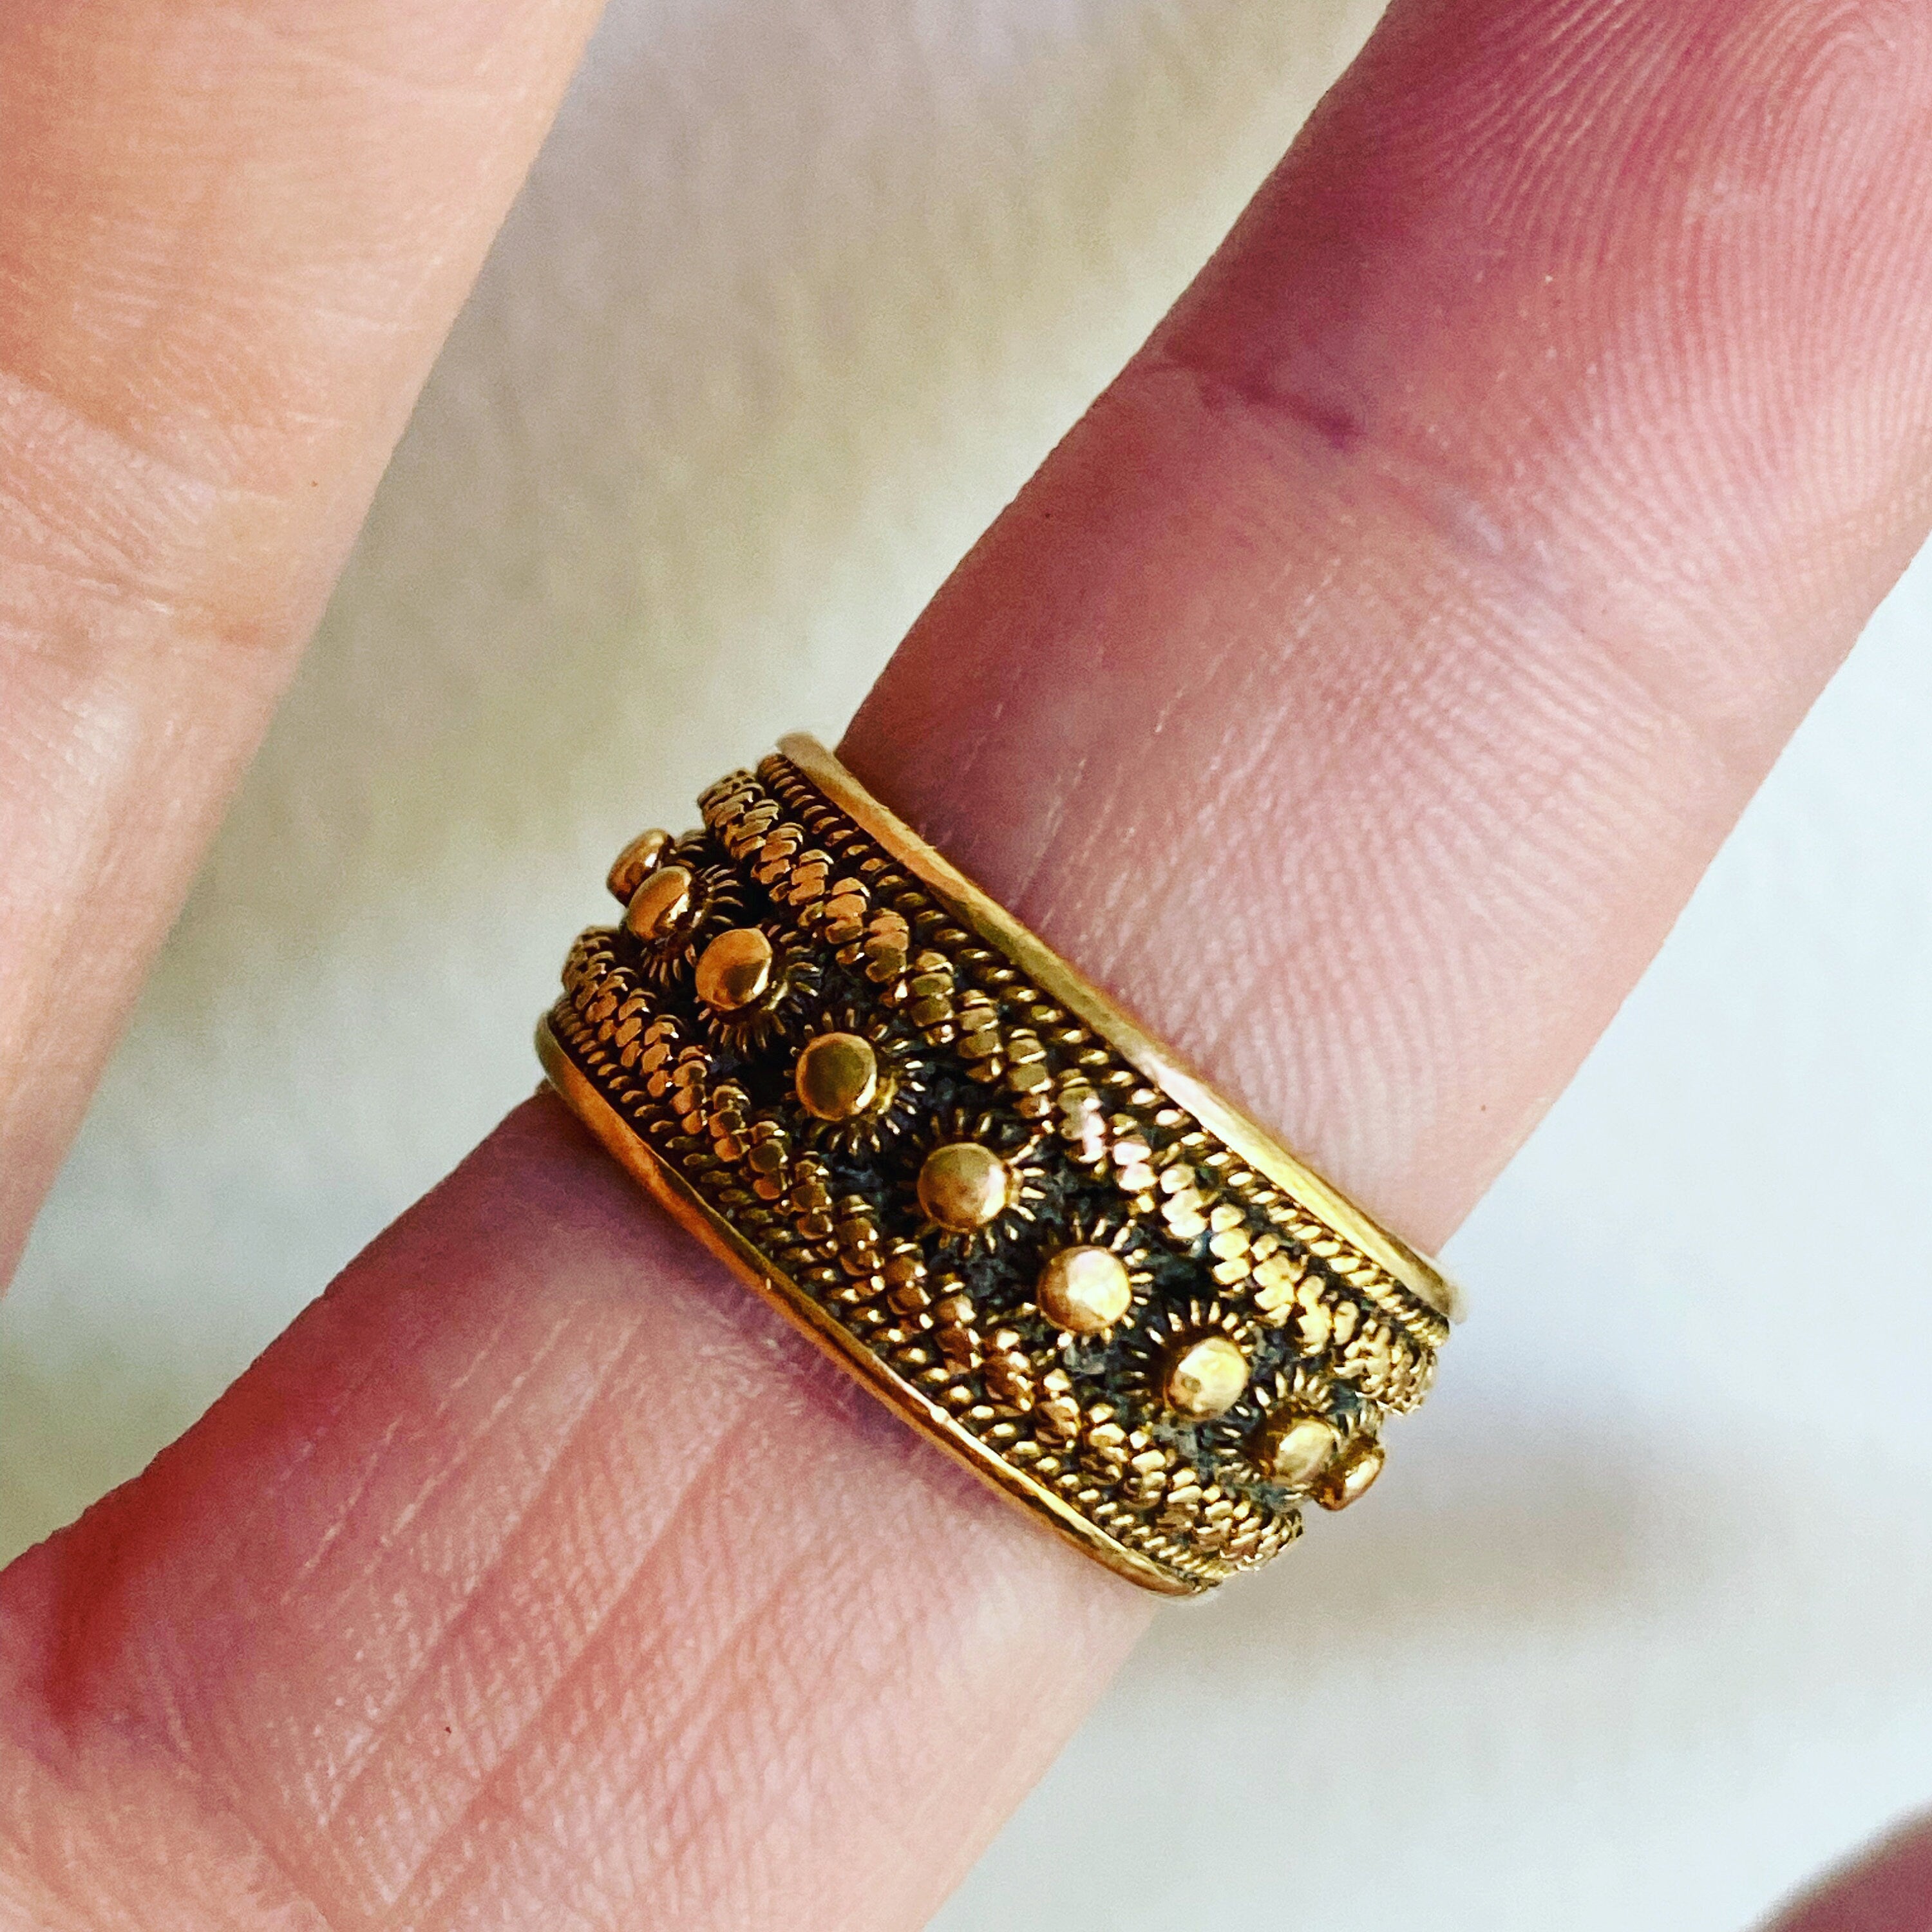 Amazing Vintage Sun Patterned 18K Yellow Gold Wide Wedding Band.